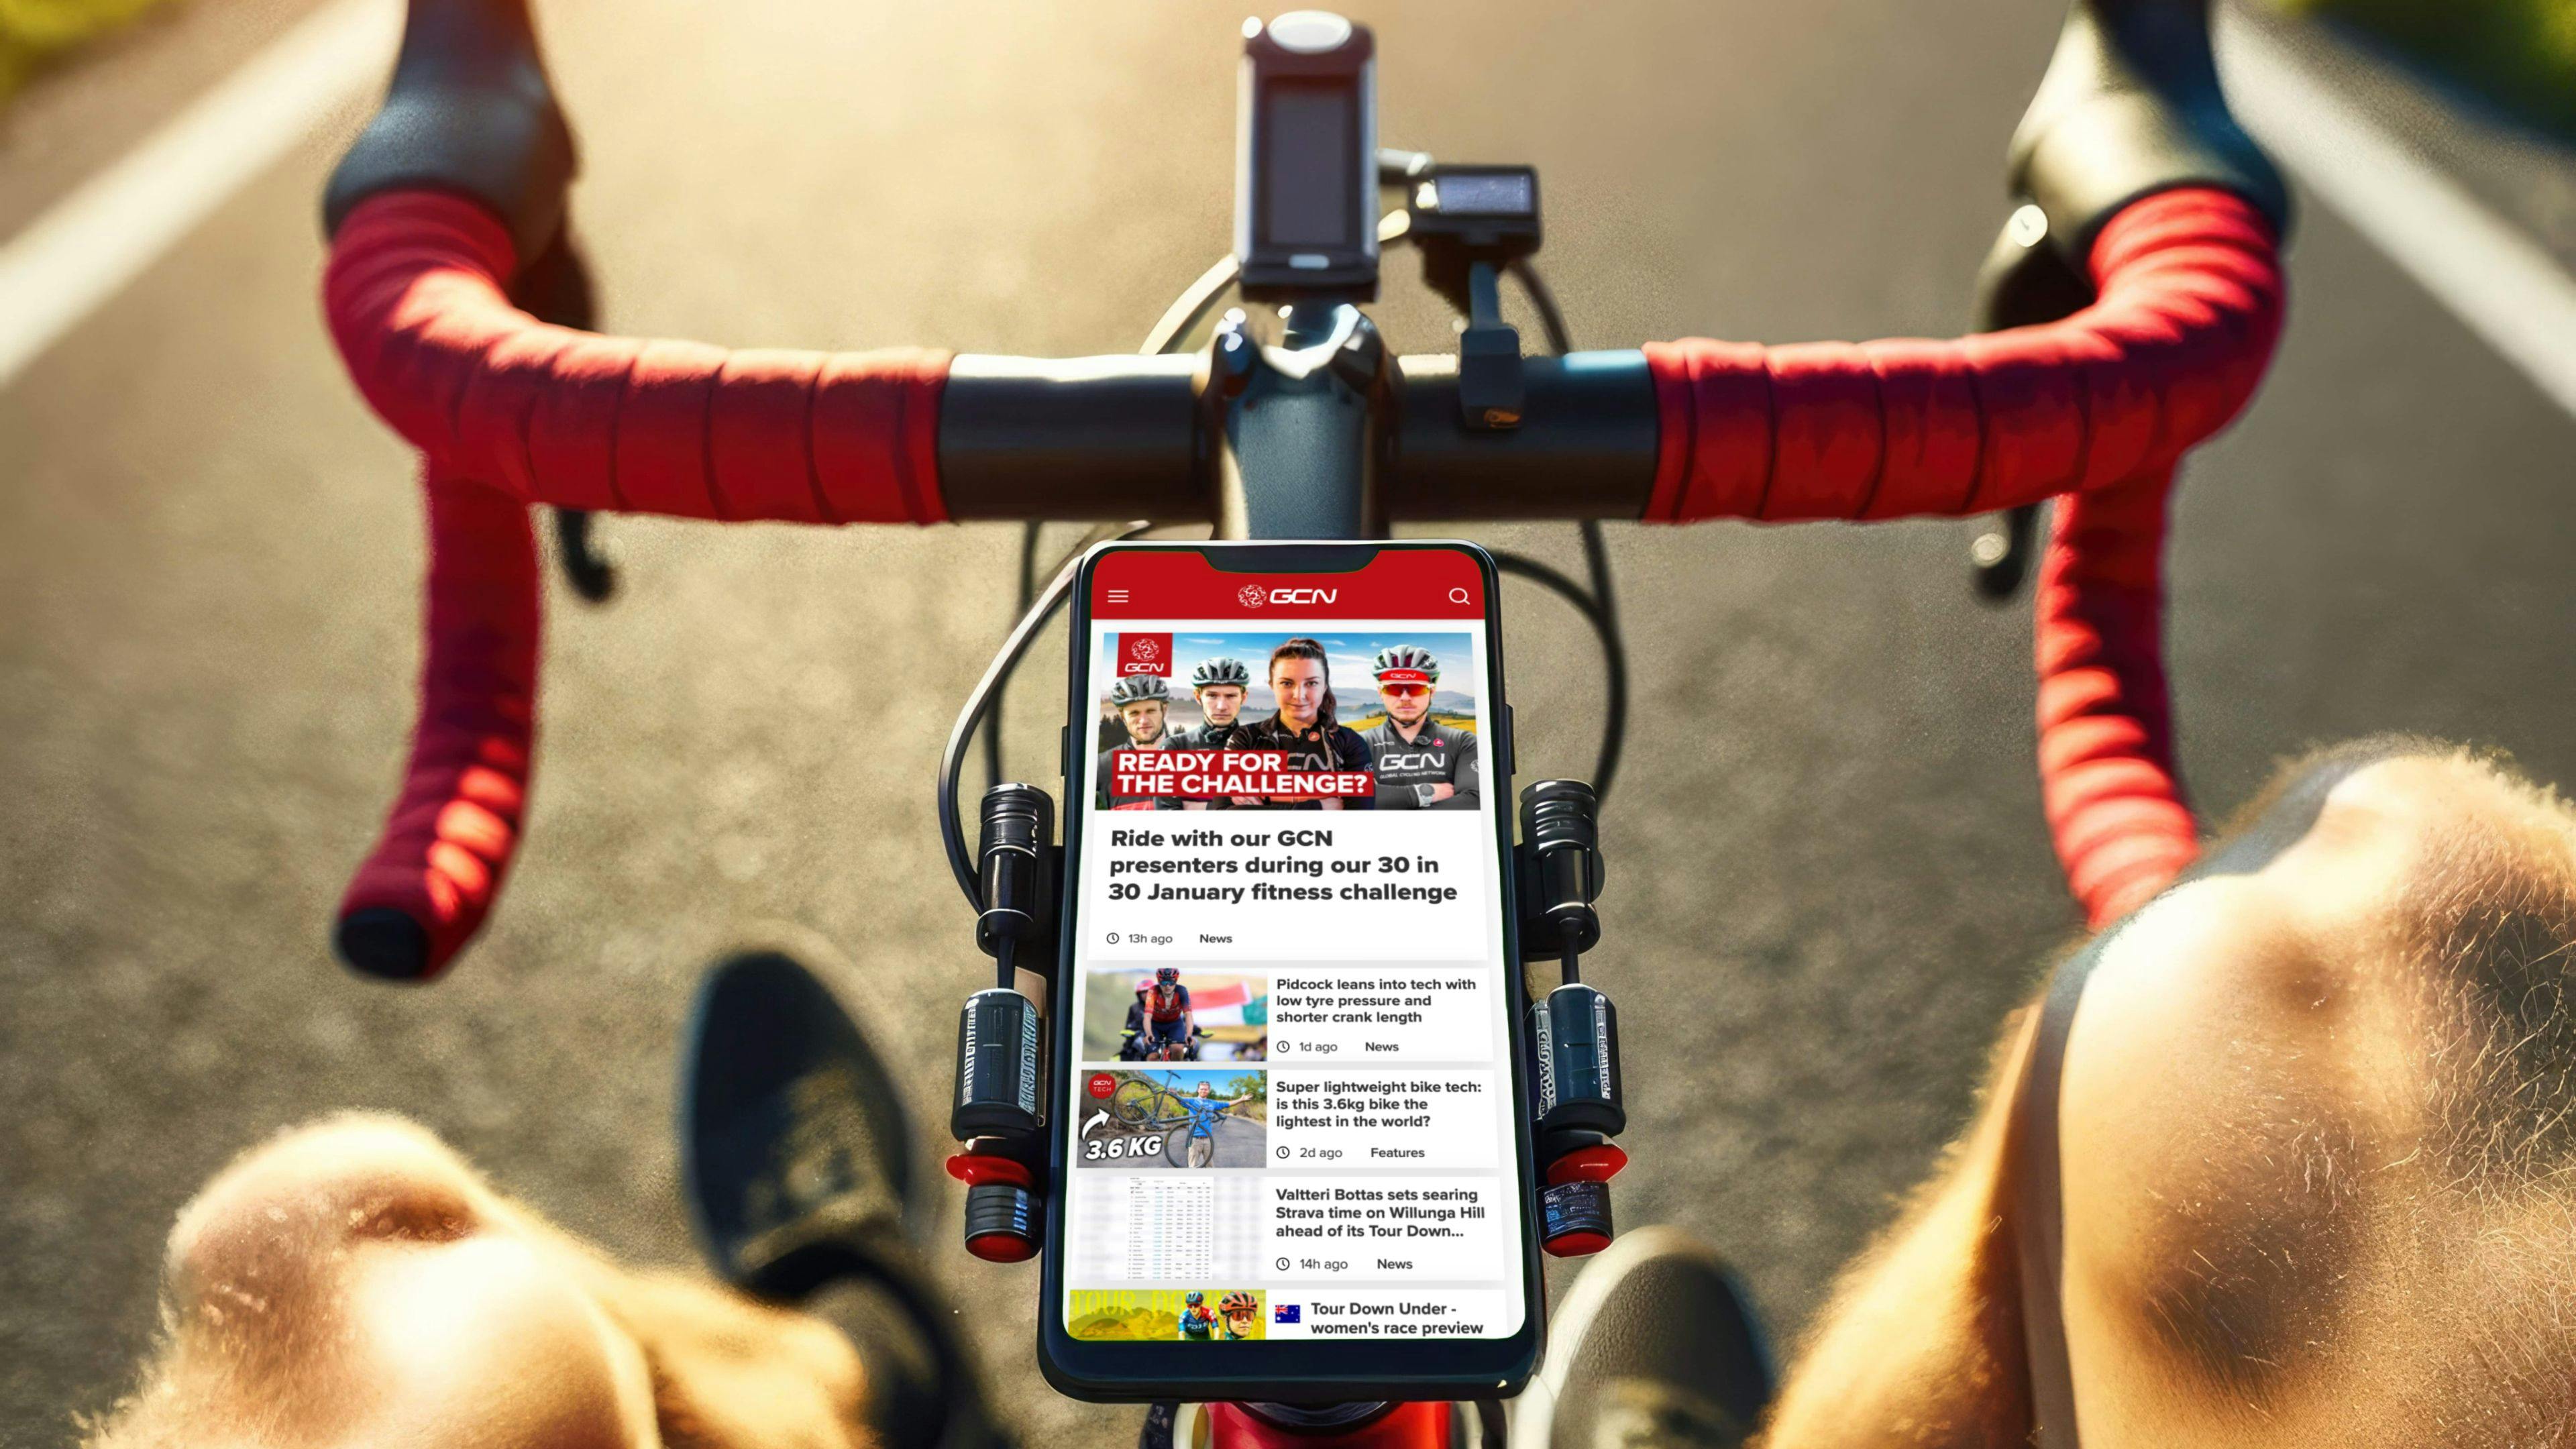 Mockup of the Global Cycling Network homepage on a road bike with a bunch of gear